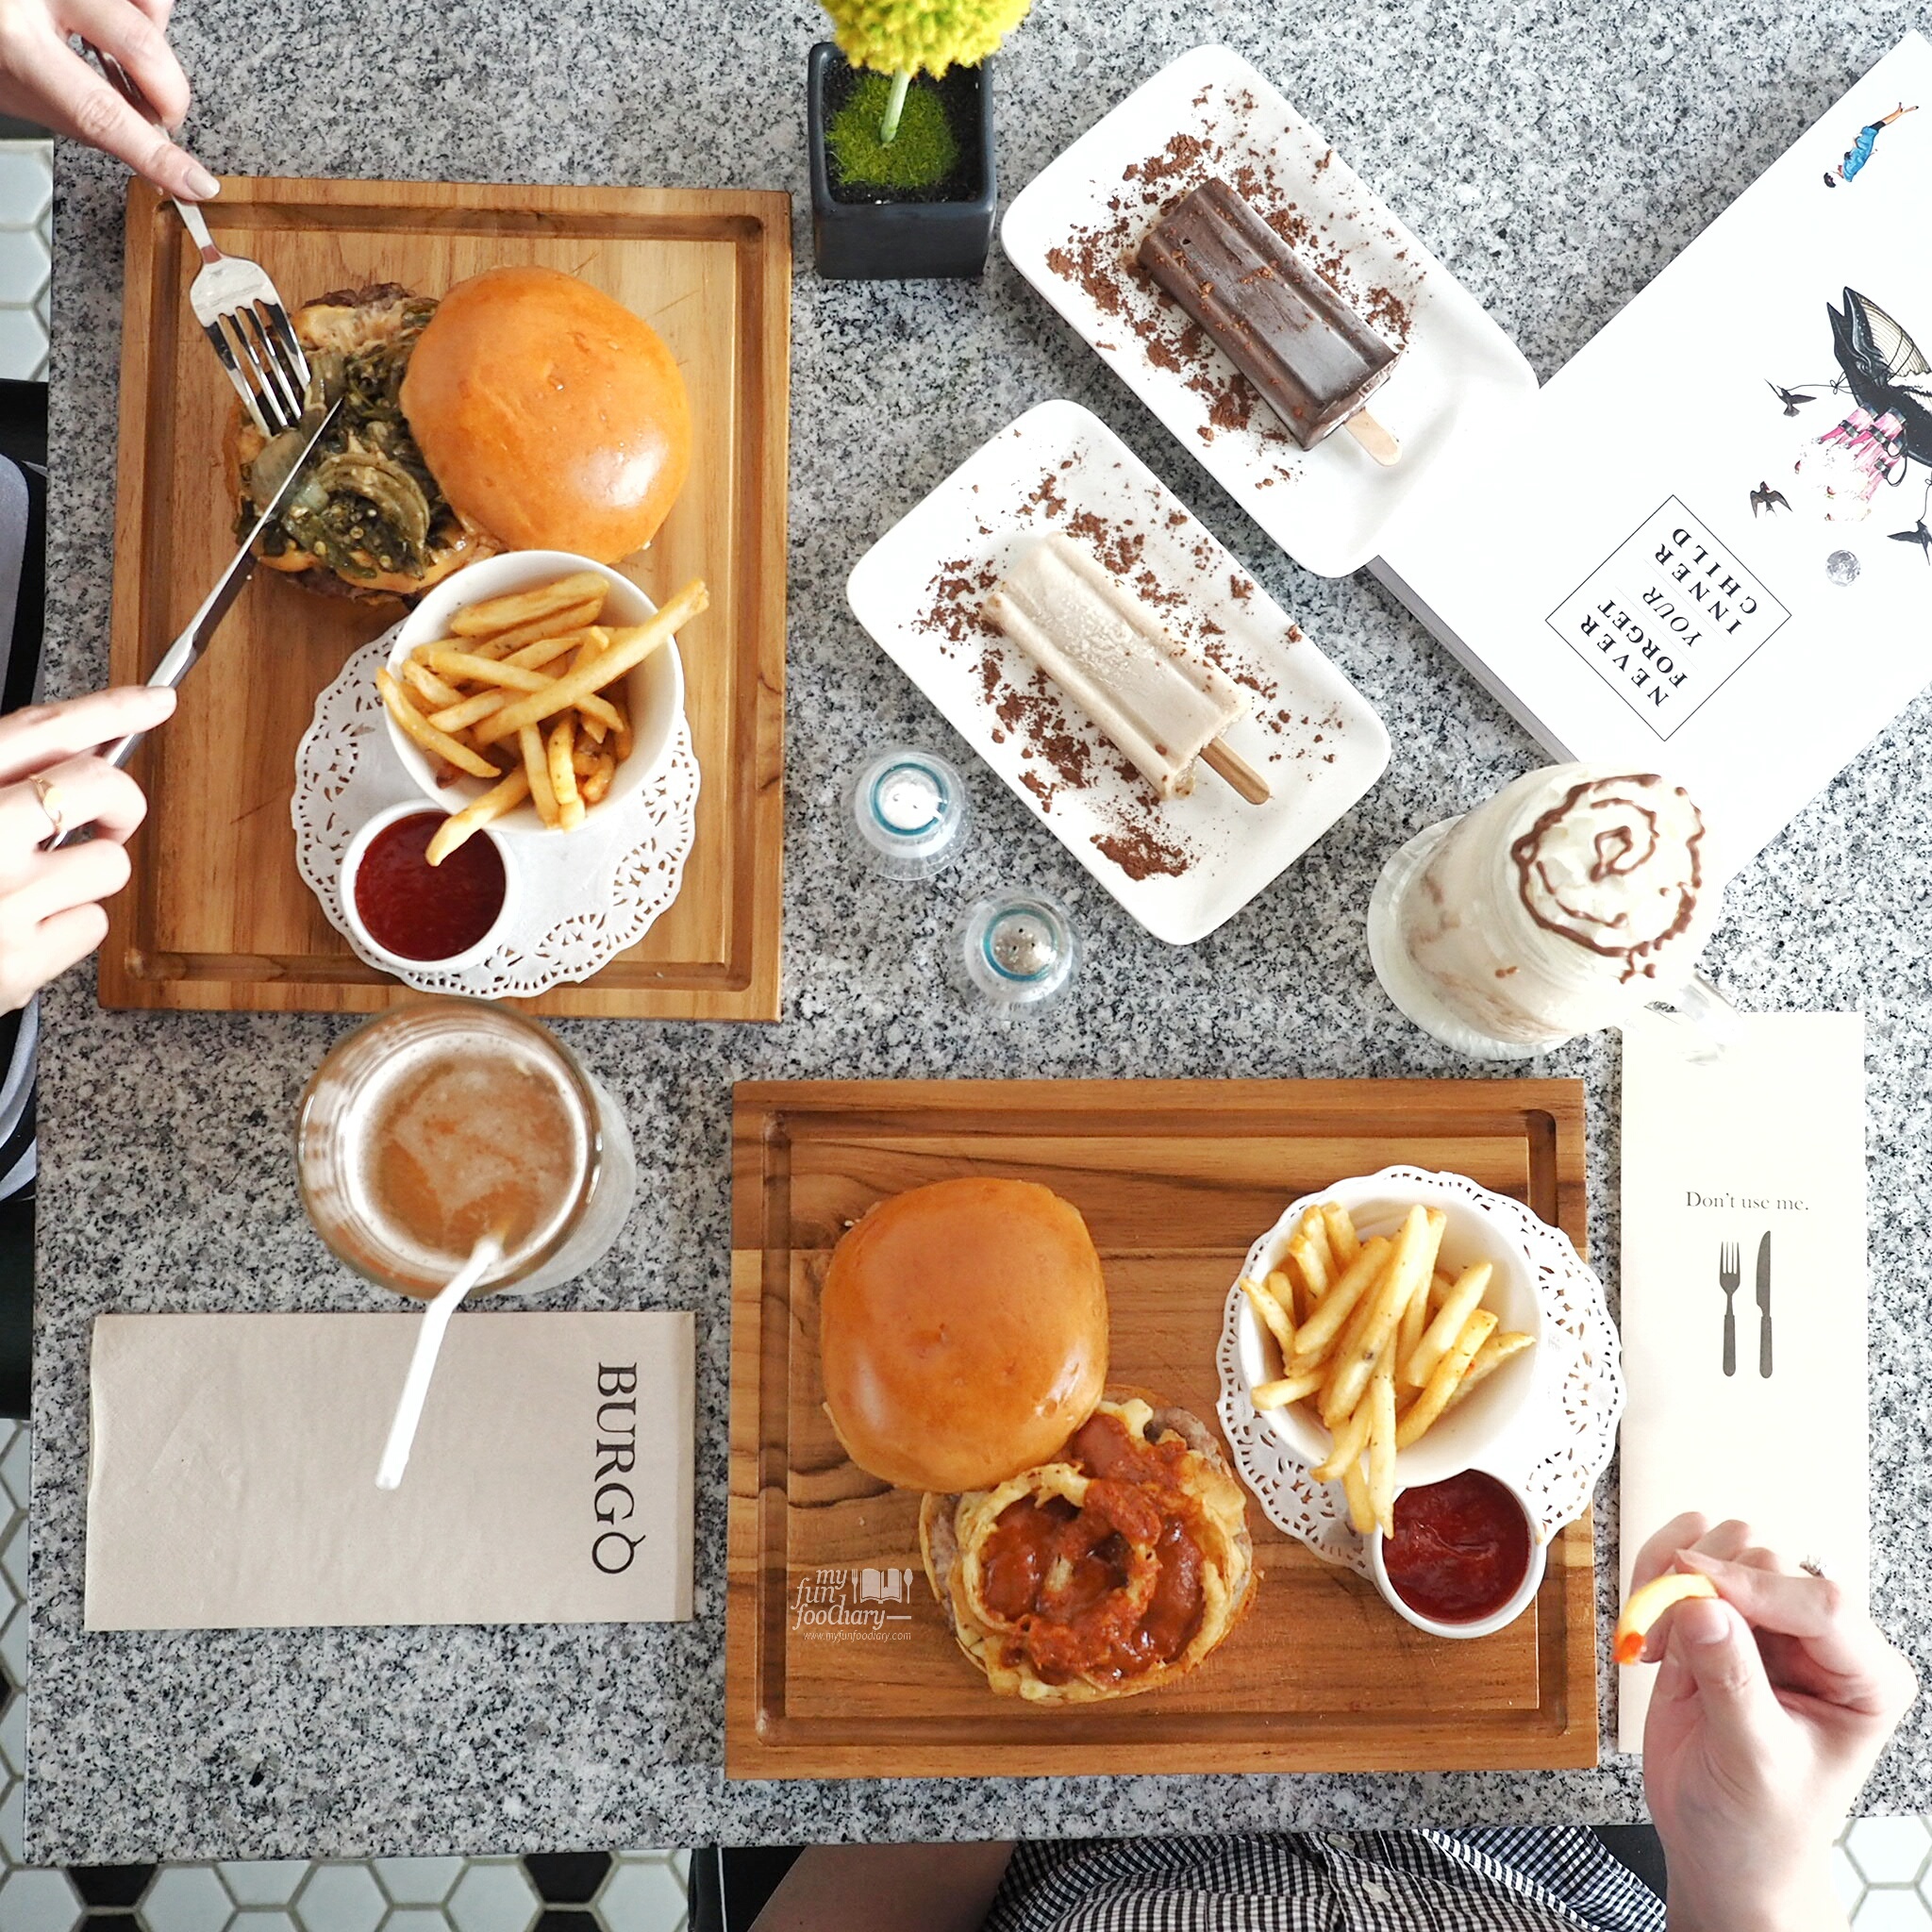 Our Burger Lunch Situation at Burgo Restaurant by Myfunfoodiary